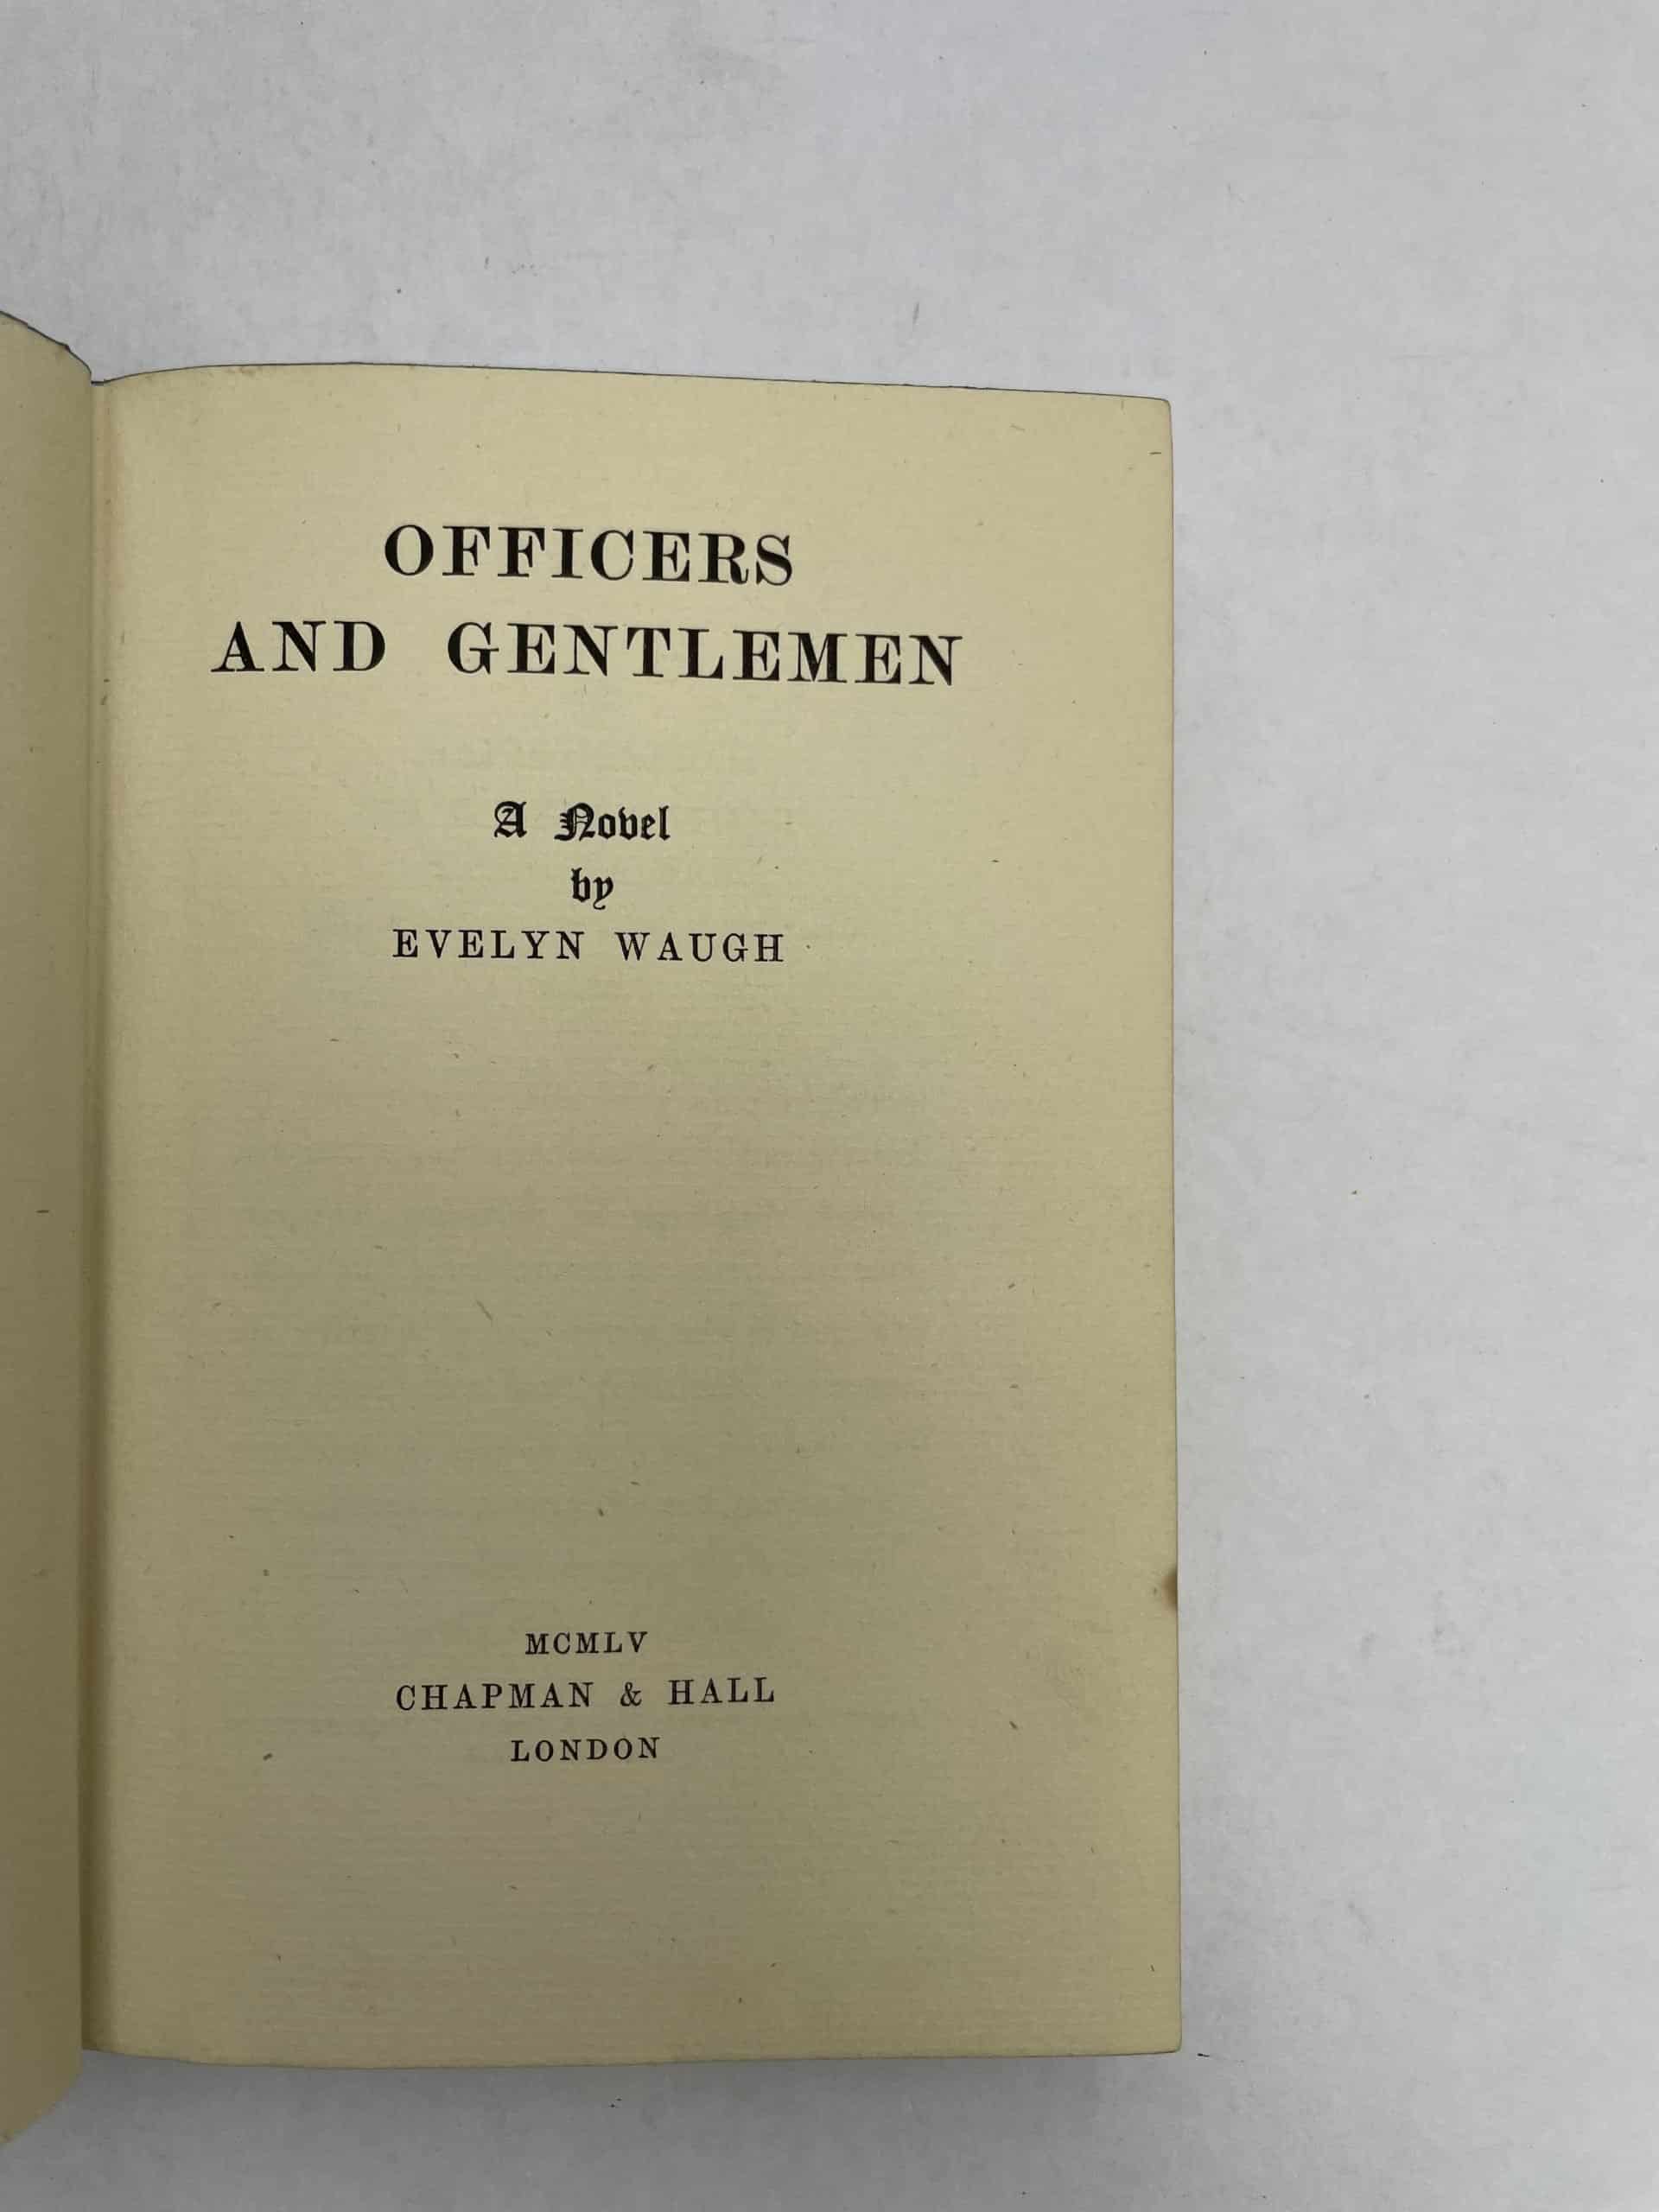 evelyn waugh officers and gentlemen first 2